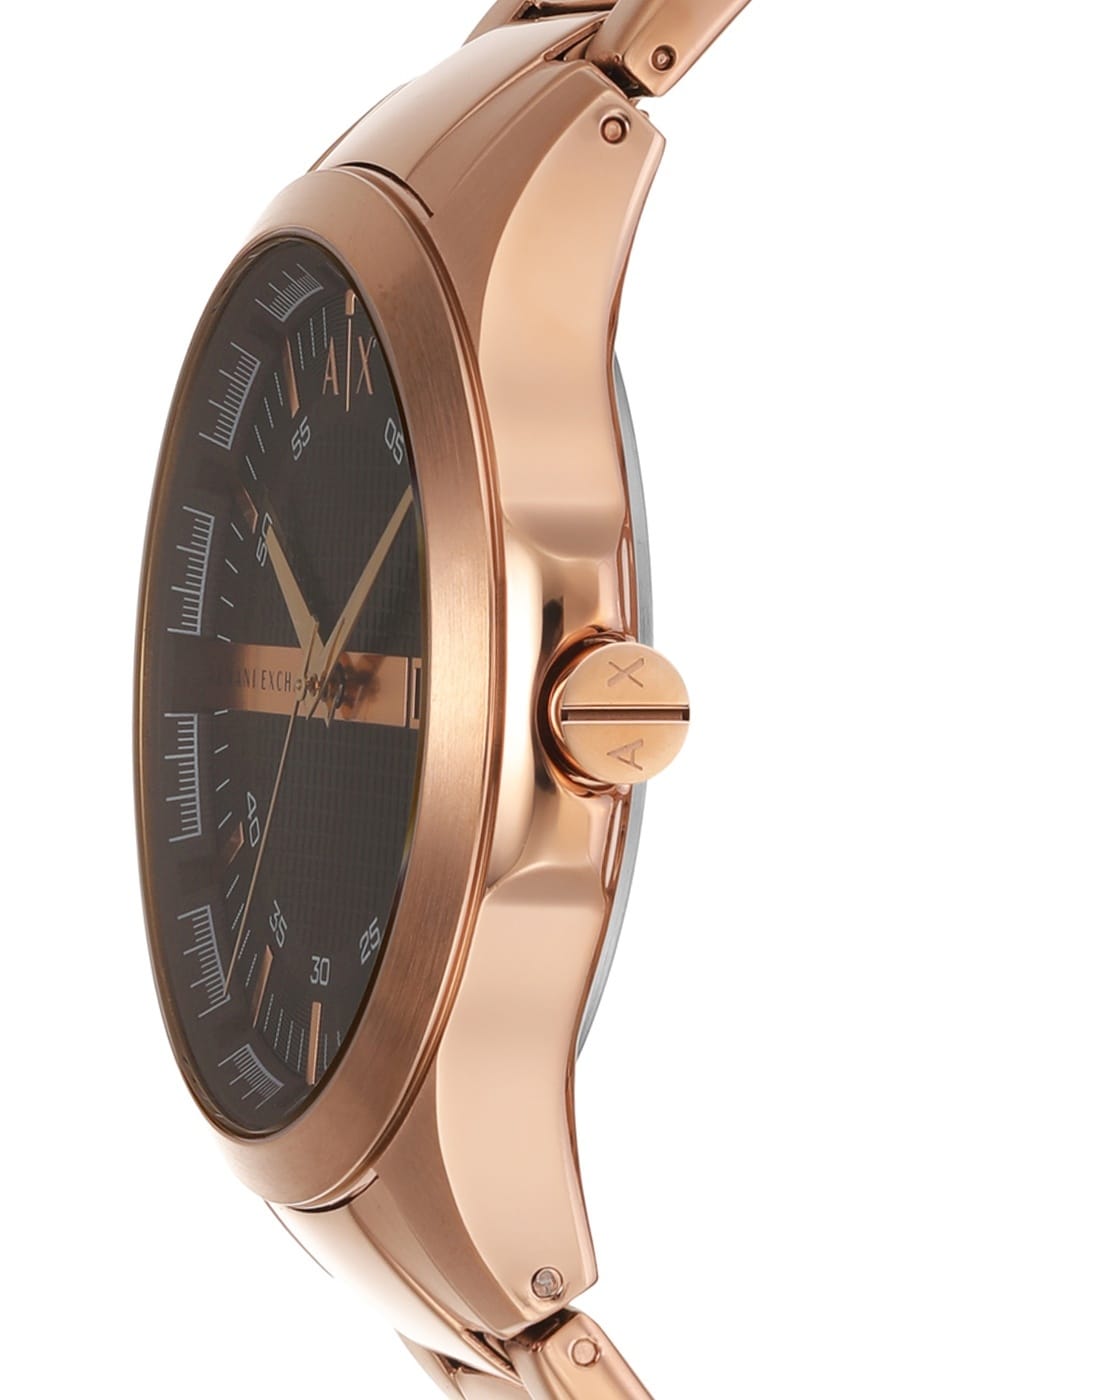 Buy Rose Gold Watches for Men by ARMANI EXCHANGE Online